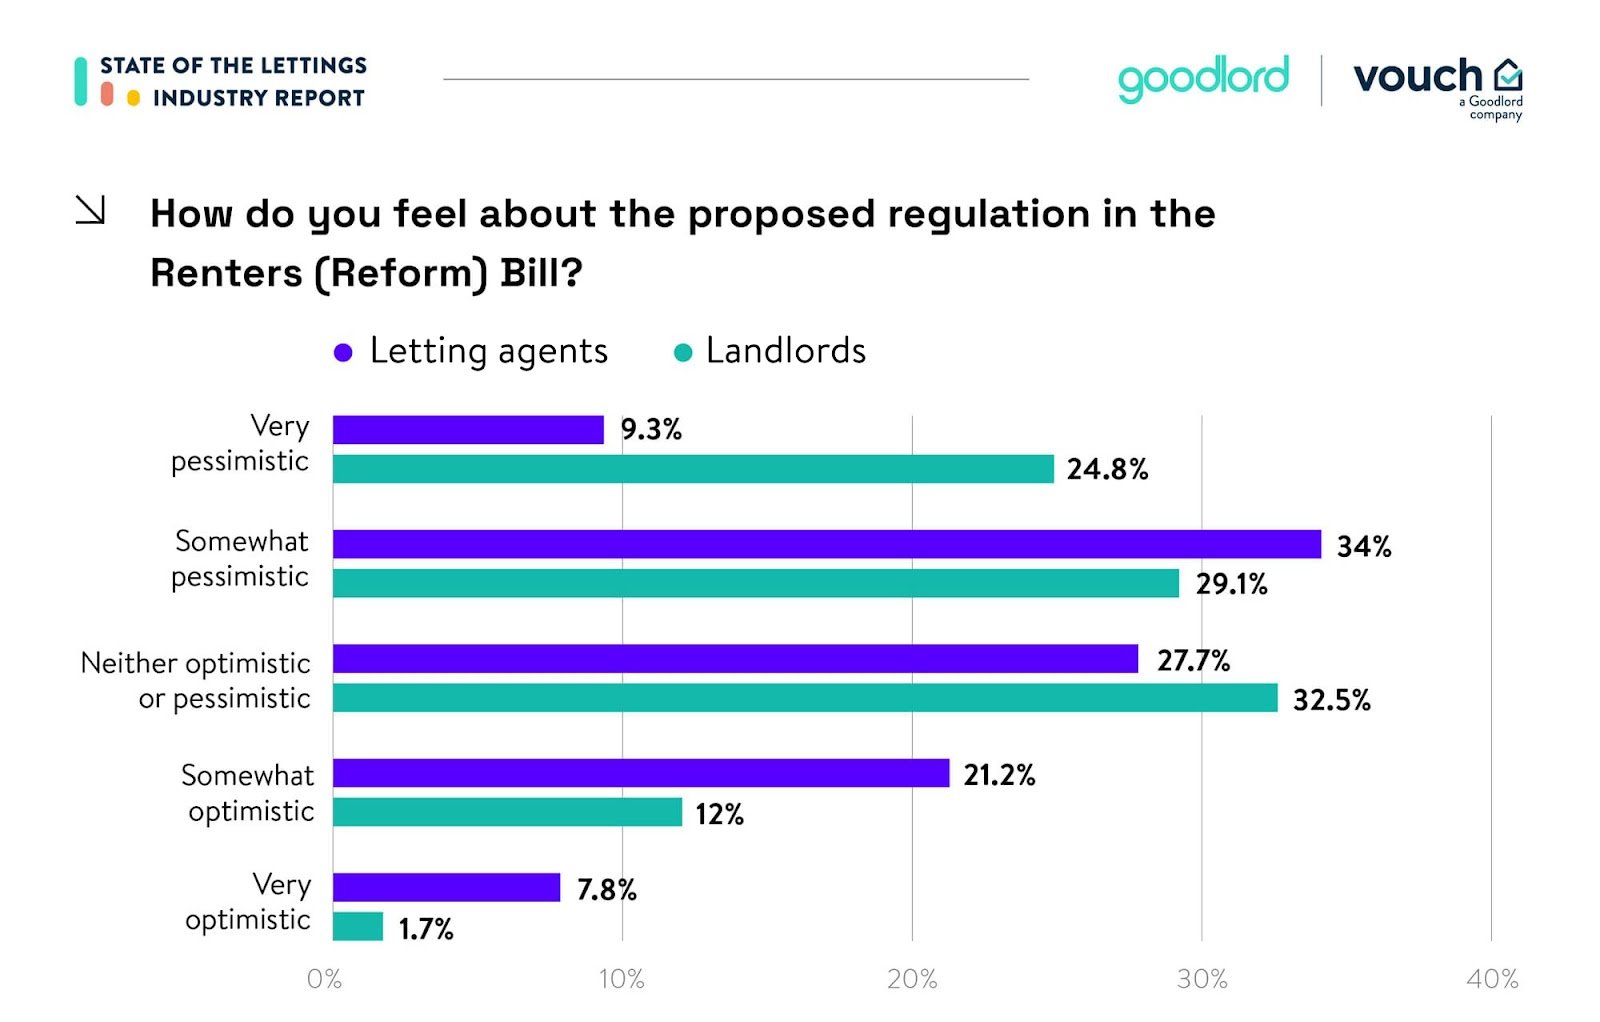 Image is a graph that says: How do you feel about the proposed regulation in the Renters Reform Bill? It separates Letting agents/landlords. Letting agents were 9.3% very pessmistic, 34% pessimistic, 27.7% neither, 21.2% somewhat optimistic, 7.8% very optimistic. Landlords are 24.8% very pessimistic, 29.1% pessimistic, 32.5% neither optimistic or pessimistic, 12% somewhat optimistic and 1.7% very optimistic. 